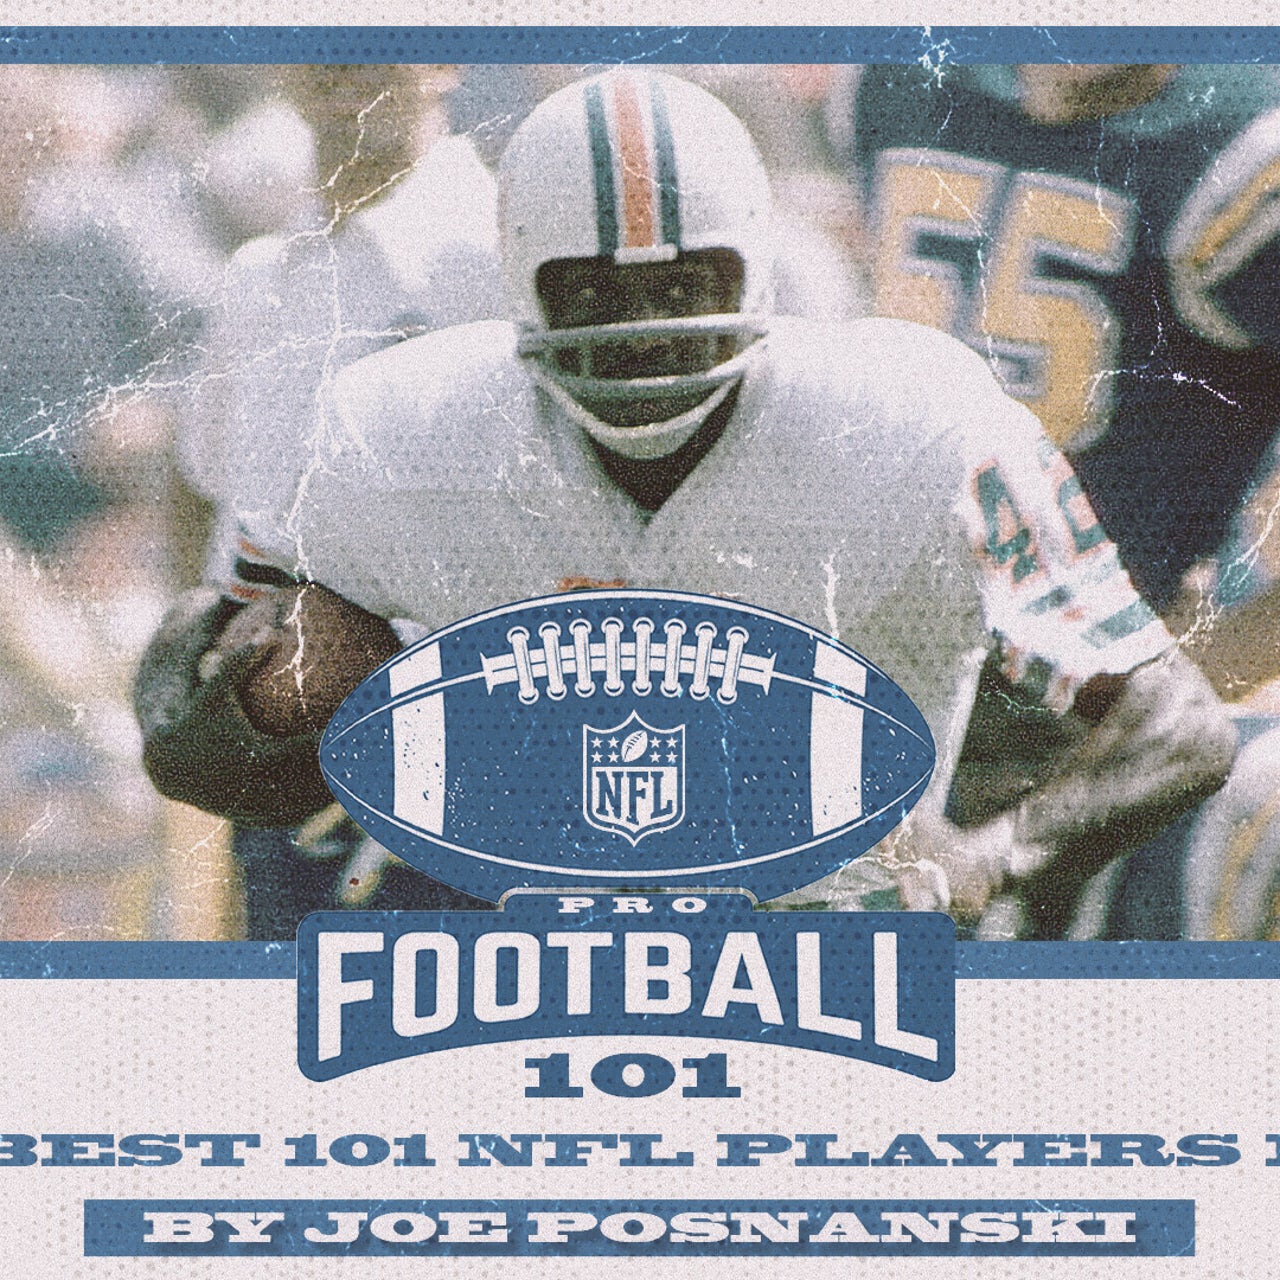 Paul Warfield - Dolphins, Browns, Memphis Southmen (WFL), BUCKEYES.